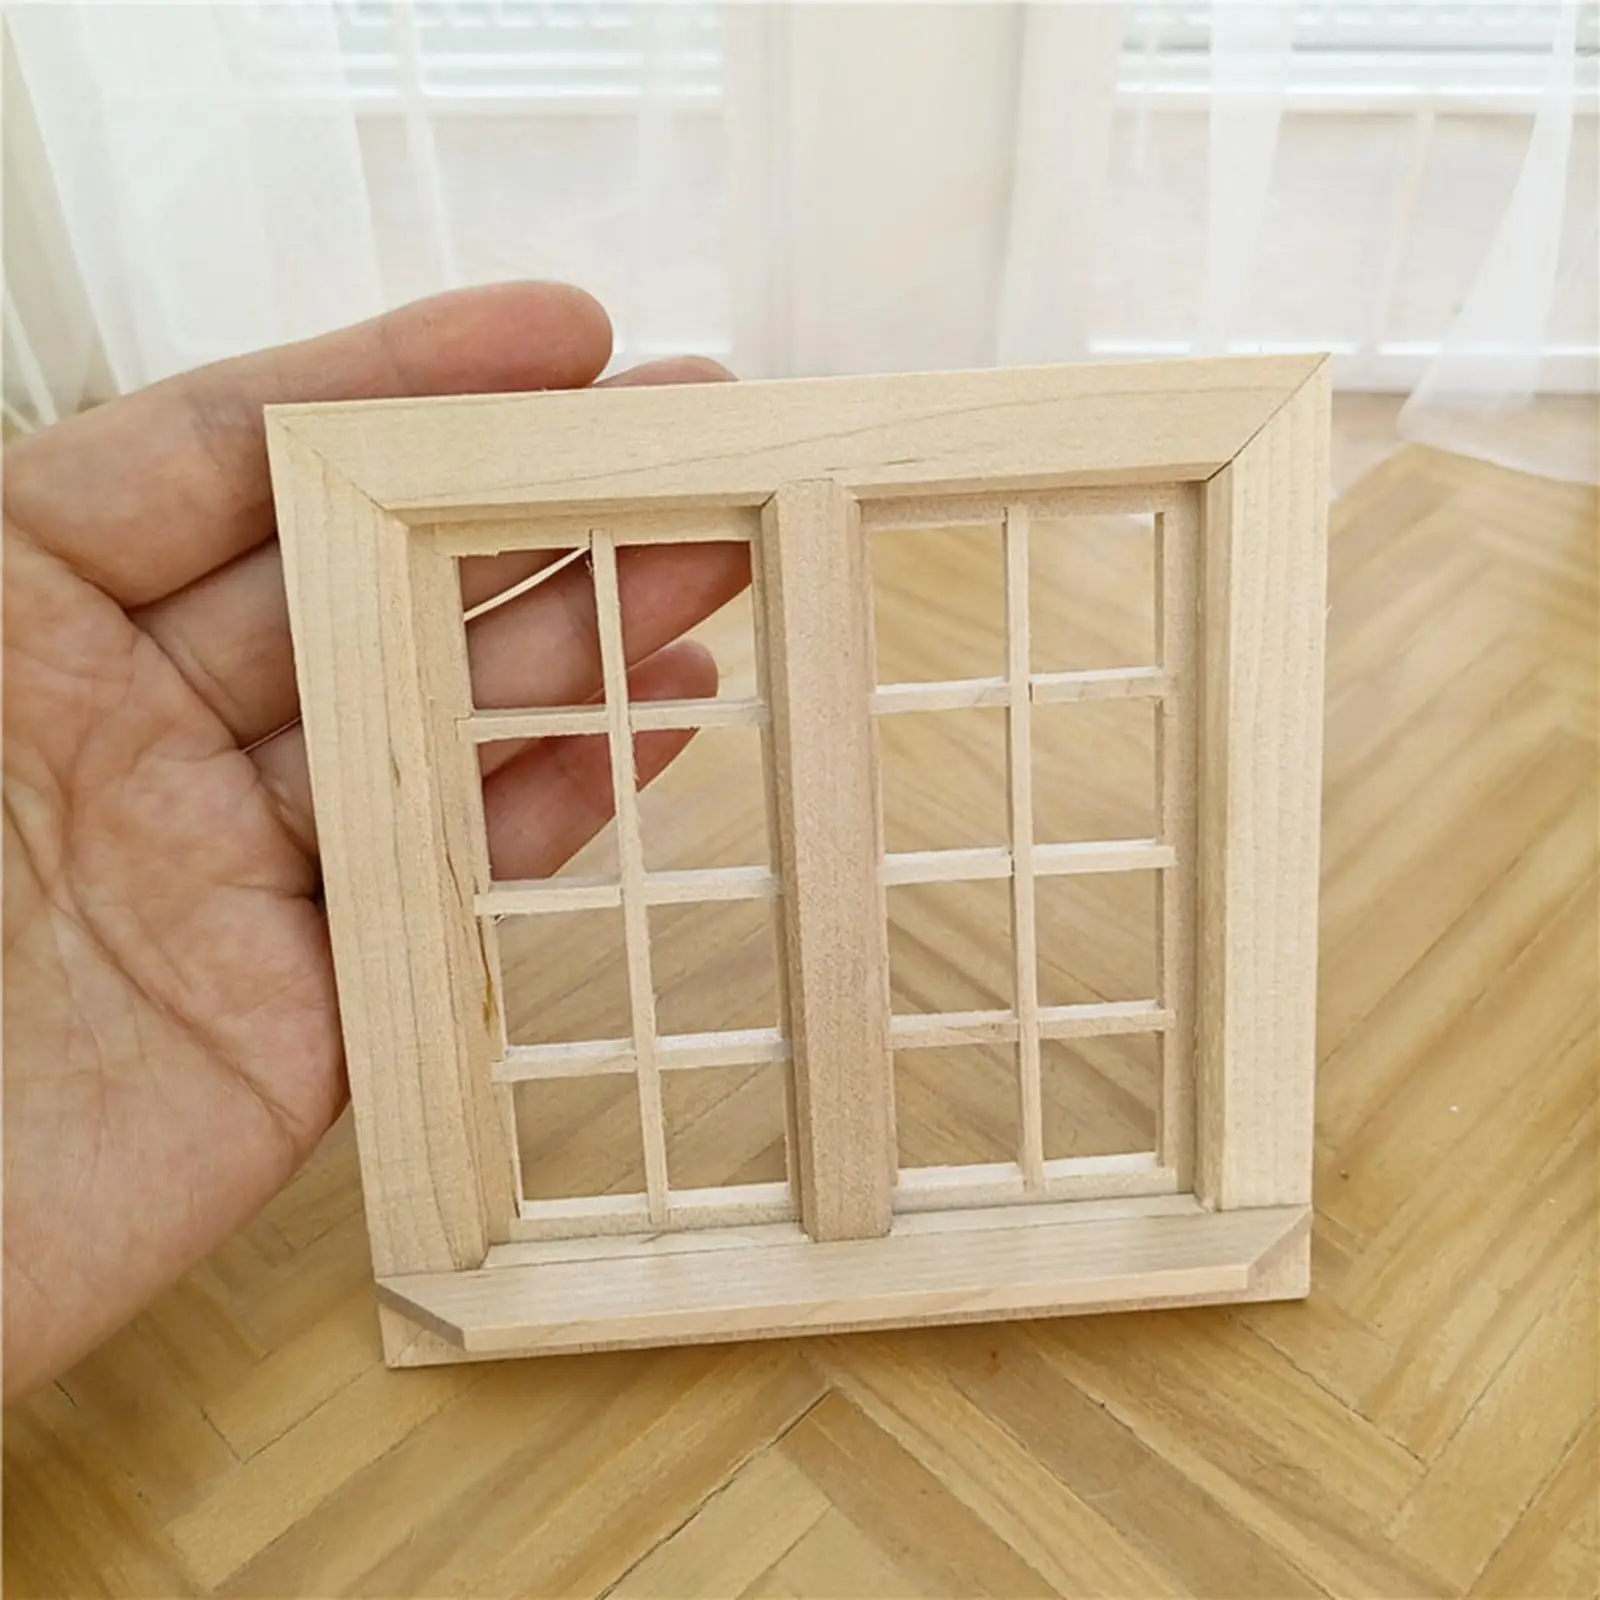 Doll House Miniature Window 16 Panel Girls Gifts Furniture for Fairy Garden Living Room